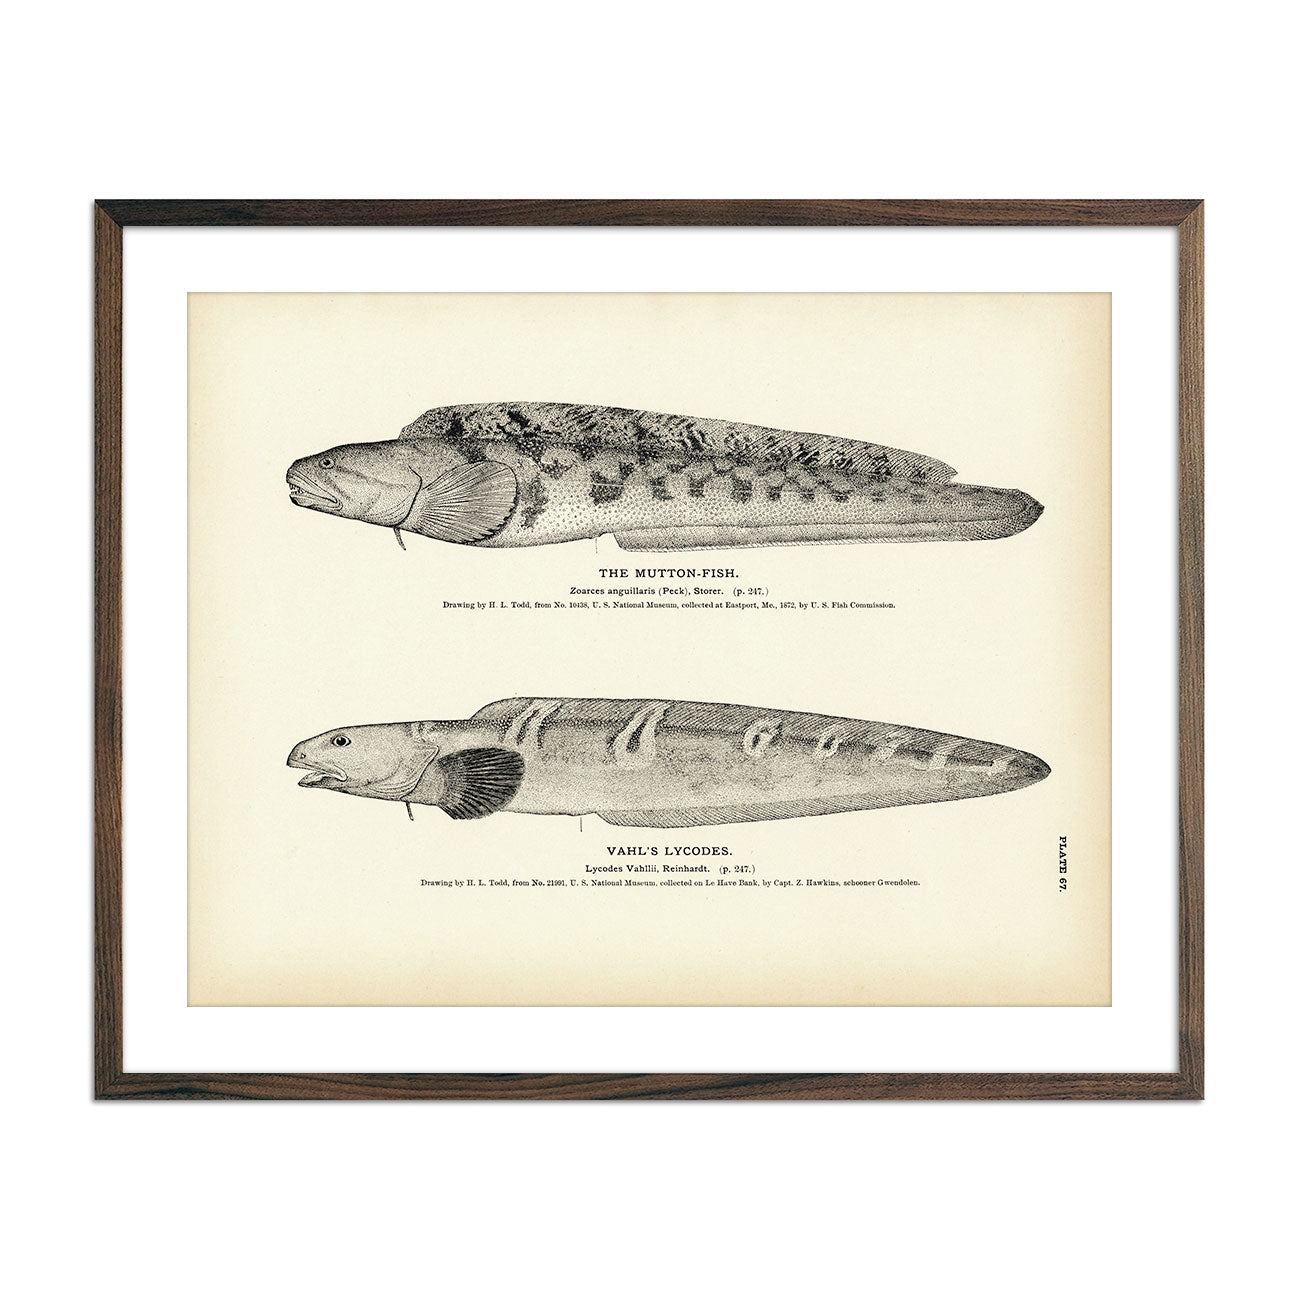 Vintage Mutton-Fish and Vahl's Lycodes fish print